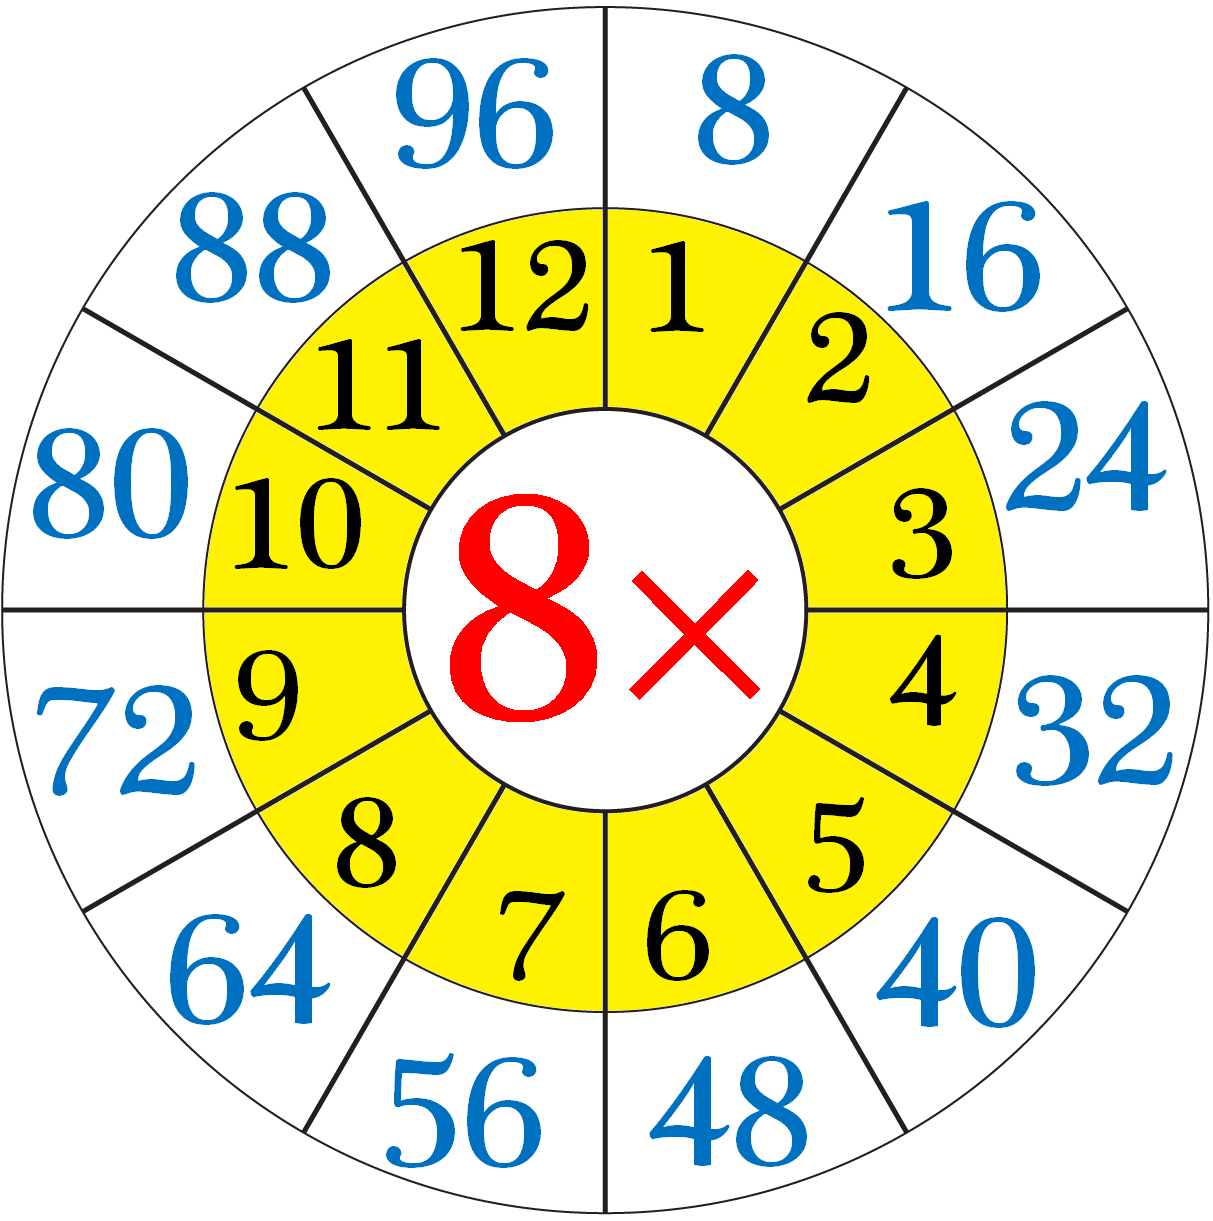 multiplication-table-of-8-read-and-write-the-table-of-8-eight-times-table